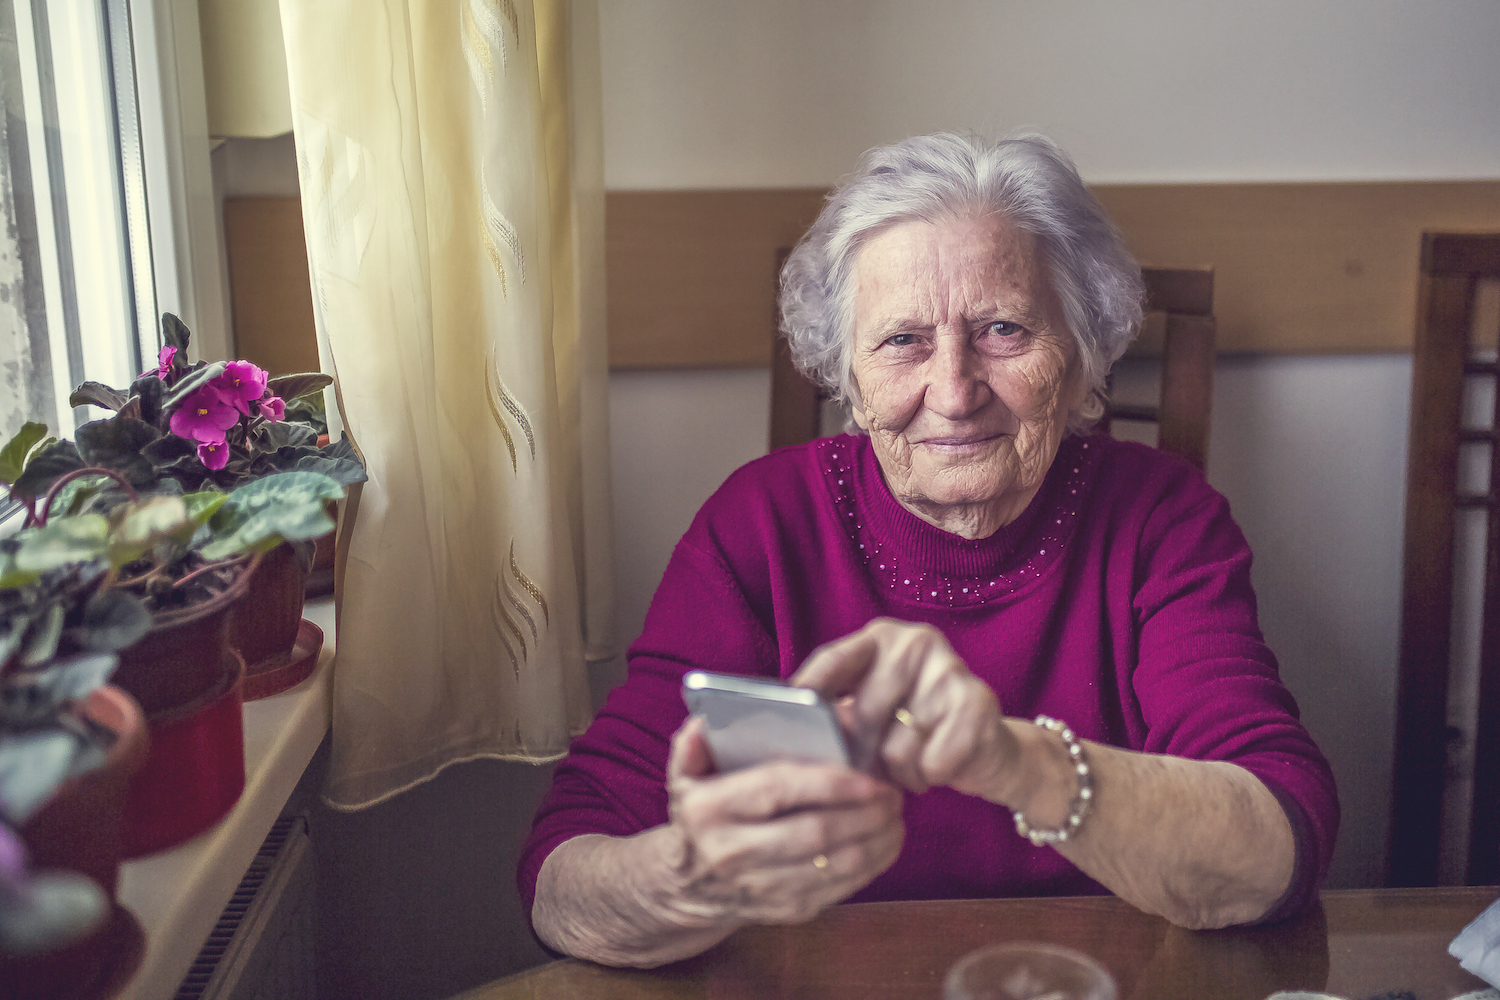 Text-First Strategy Encourages Patient-Reported Outcomes